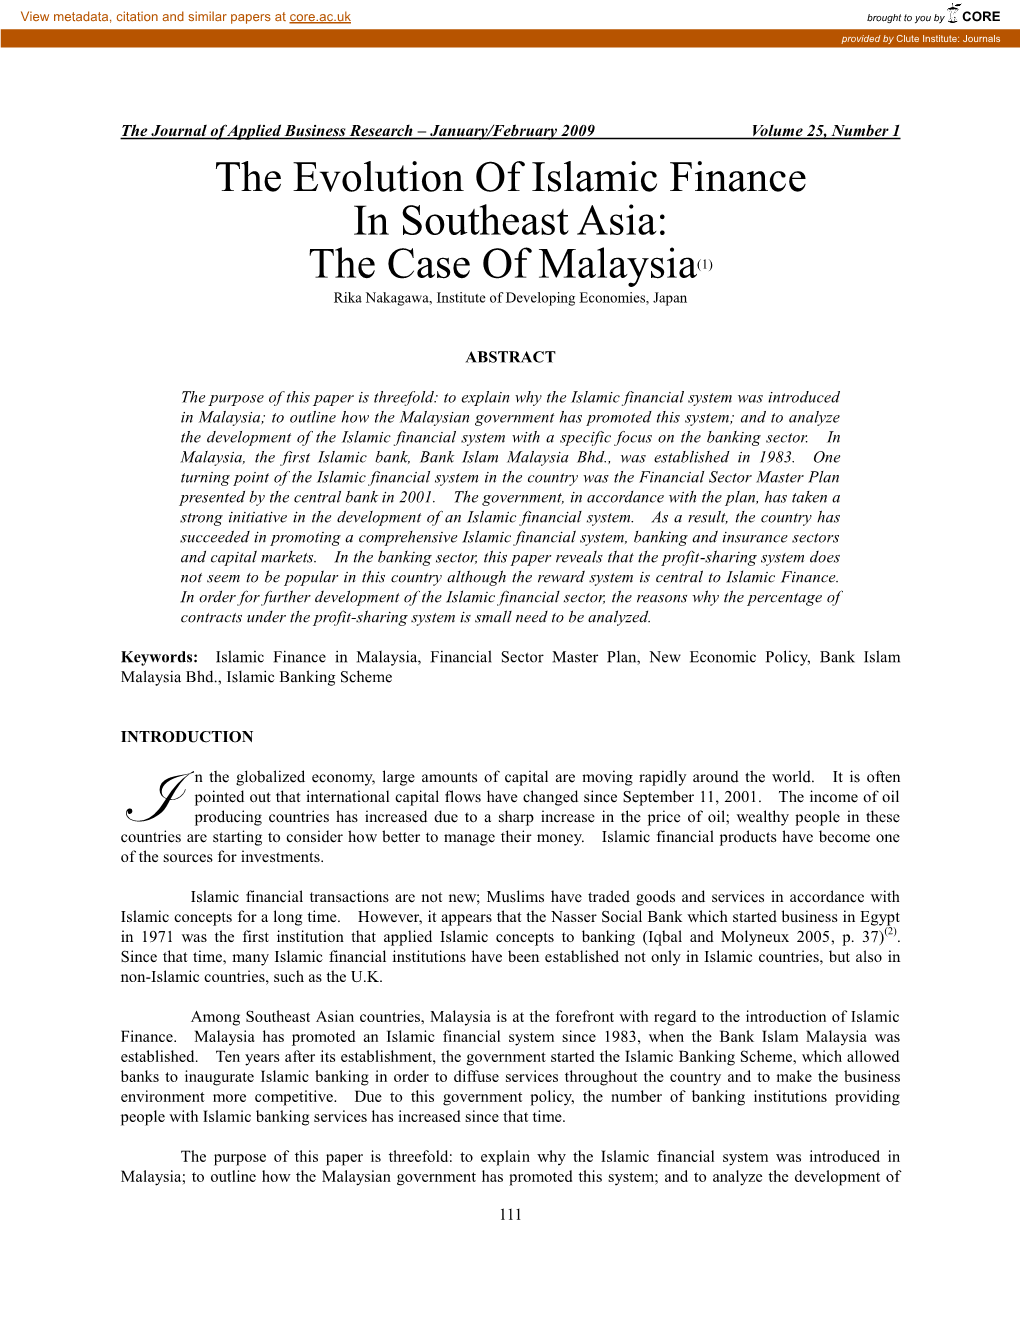 Evolution of the Islamic Banking and Finance System in Malaysia